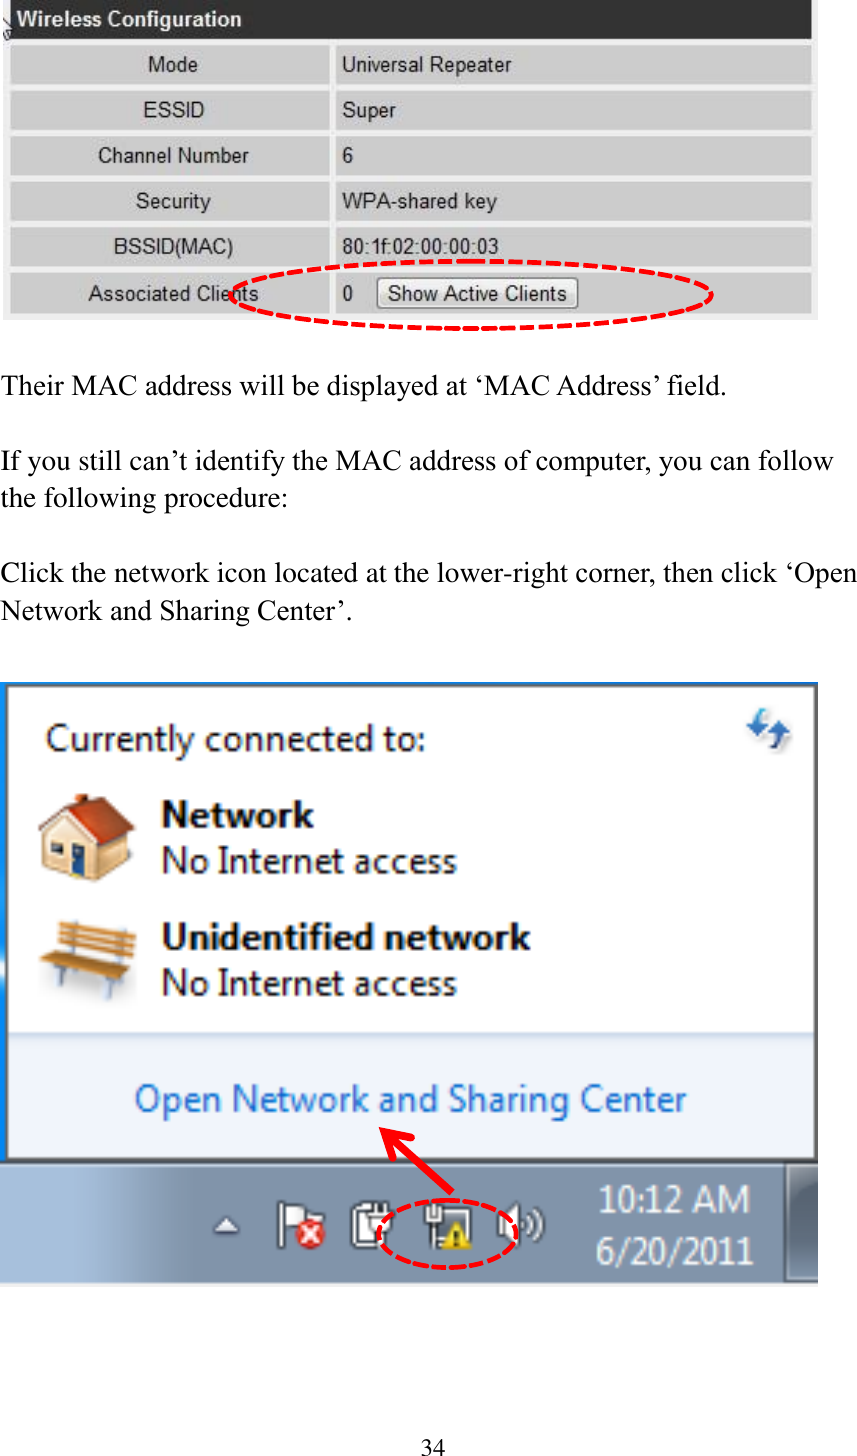 34    Their MAC address will be displayed at „MAC Address‟ field.  If you still can‟t identify the MAC address of computer, you can follow the following procedure:  Click the network icon located at the lower-right corner, then click „Open Network and Sharing Center‟.       